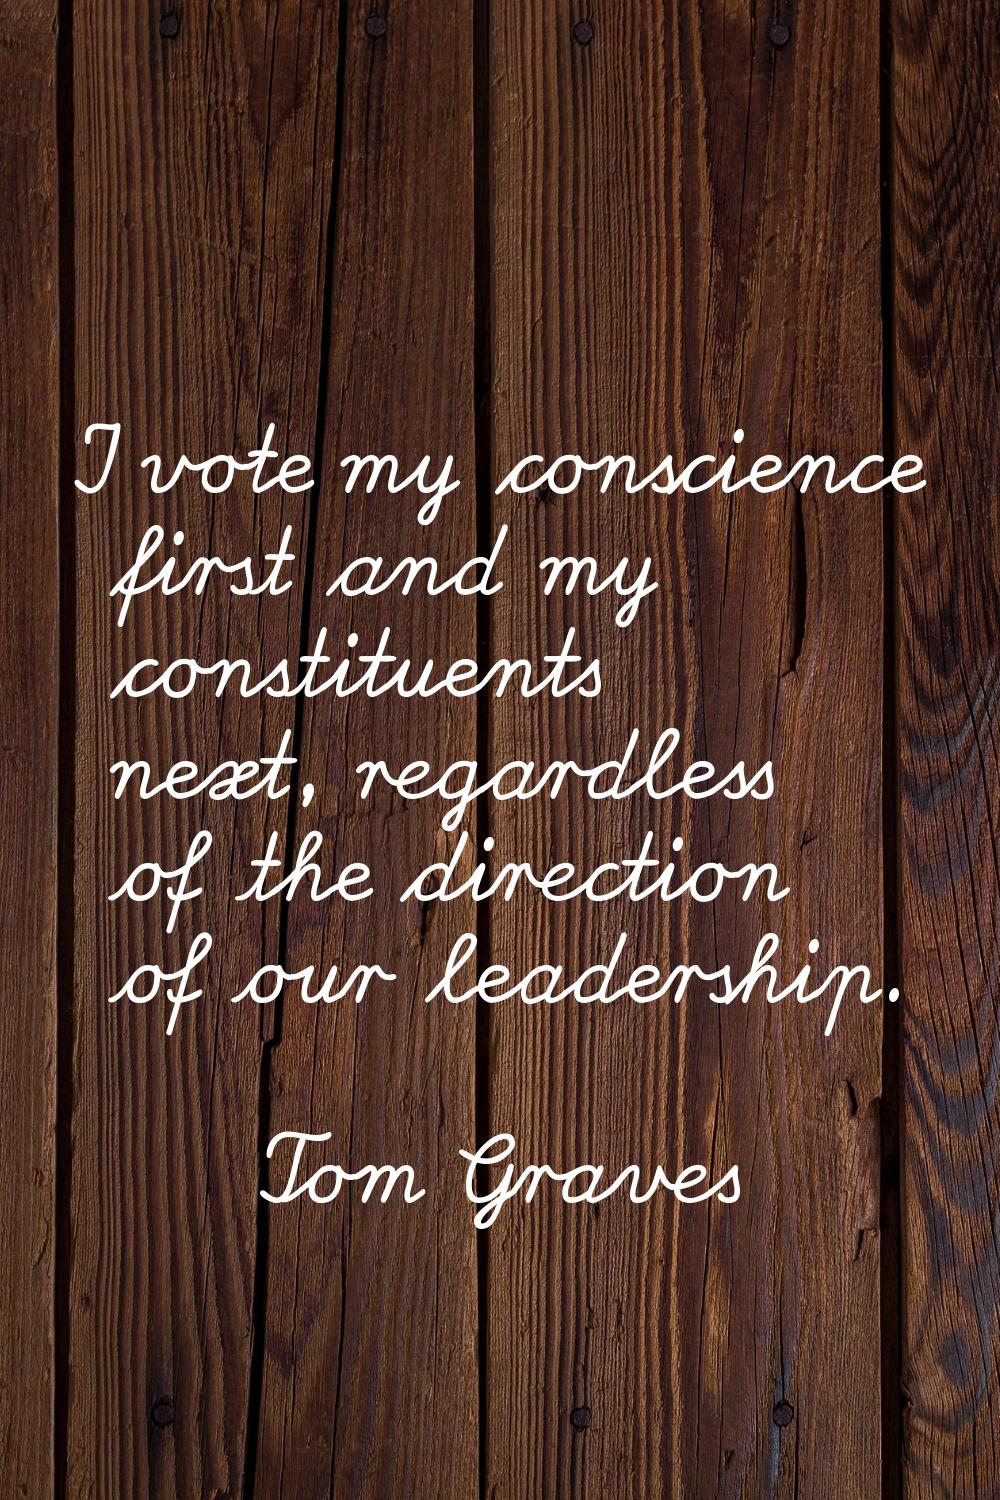 I vote my conscience first and my constituents next, regardless of the direction of our leadership.